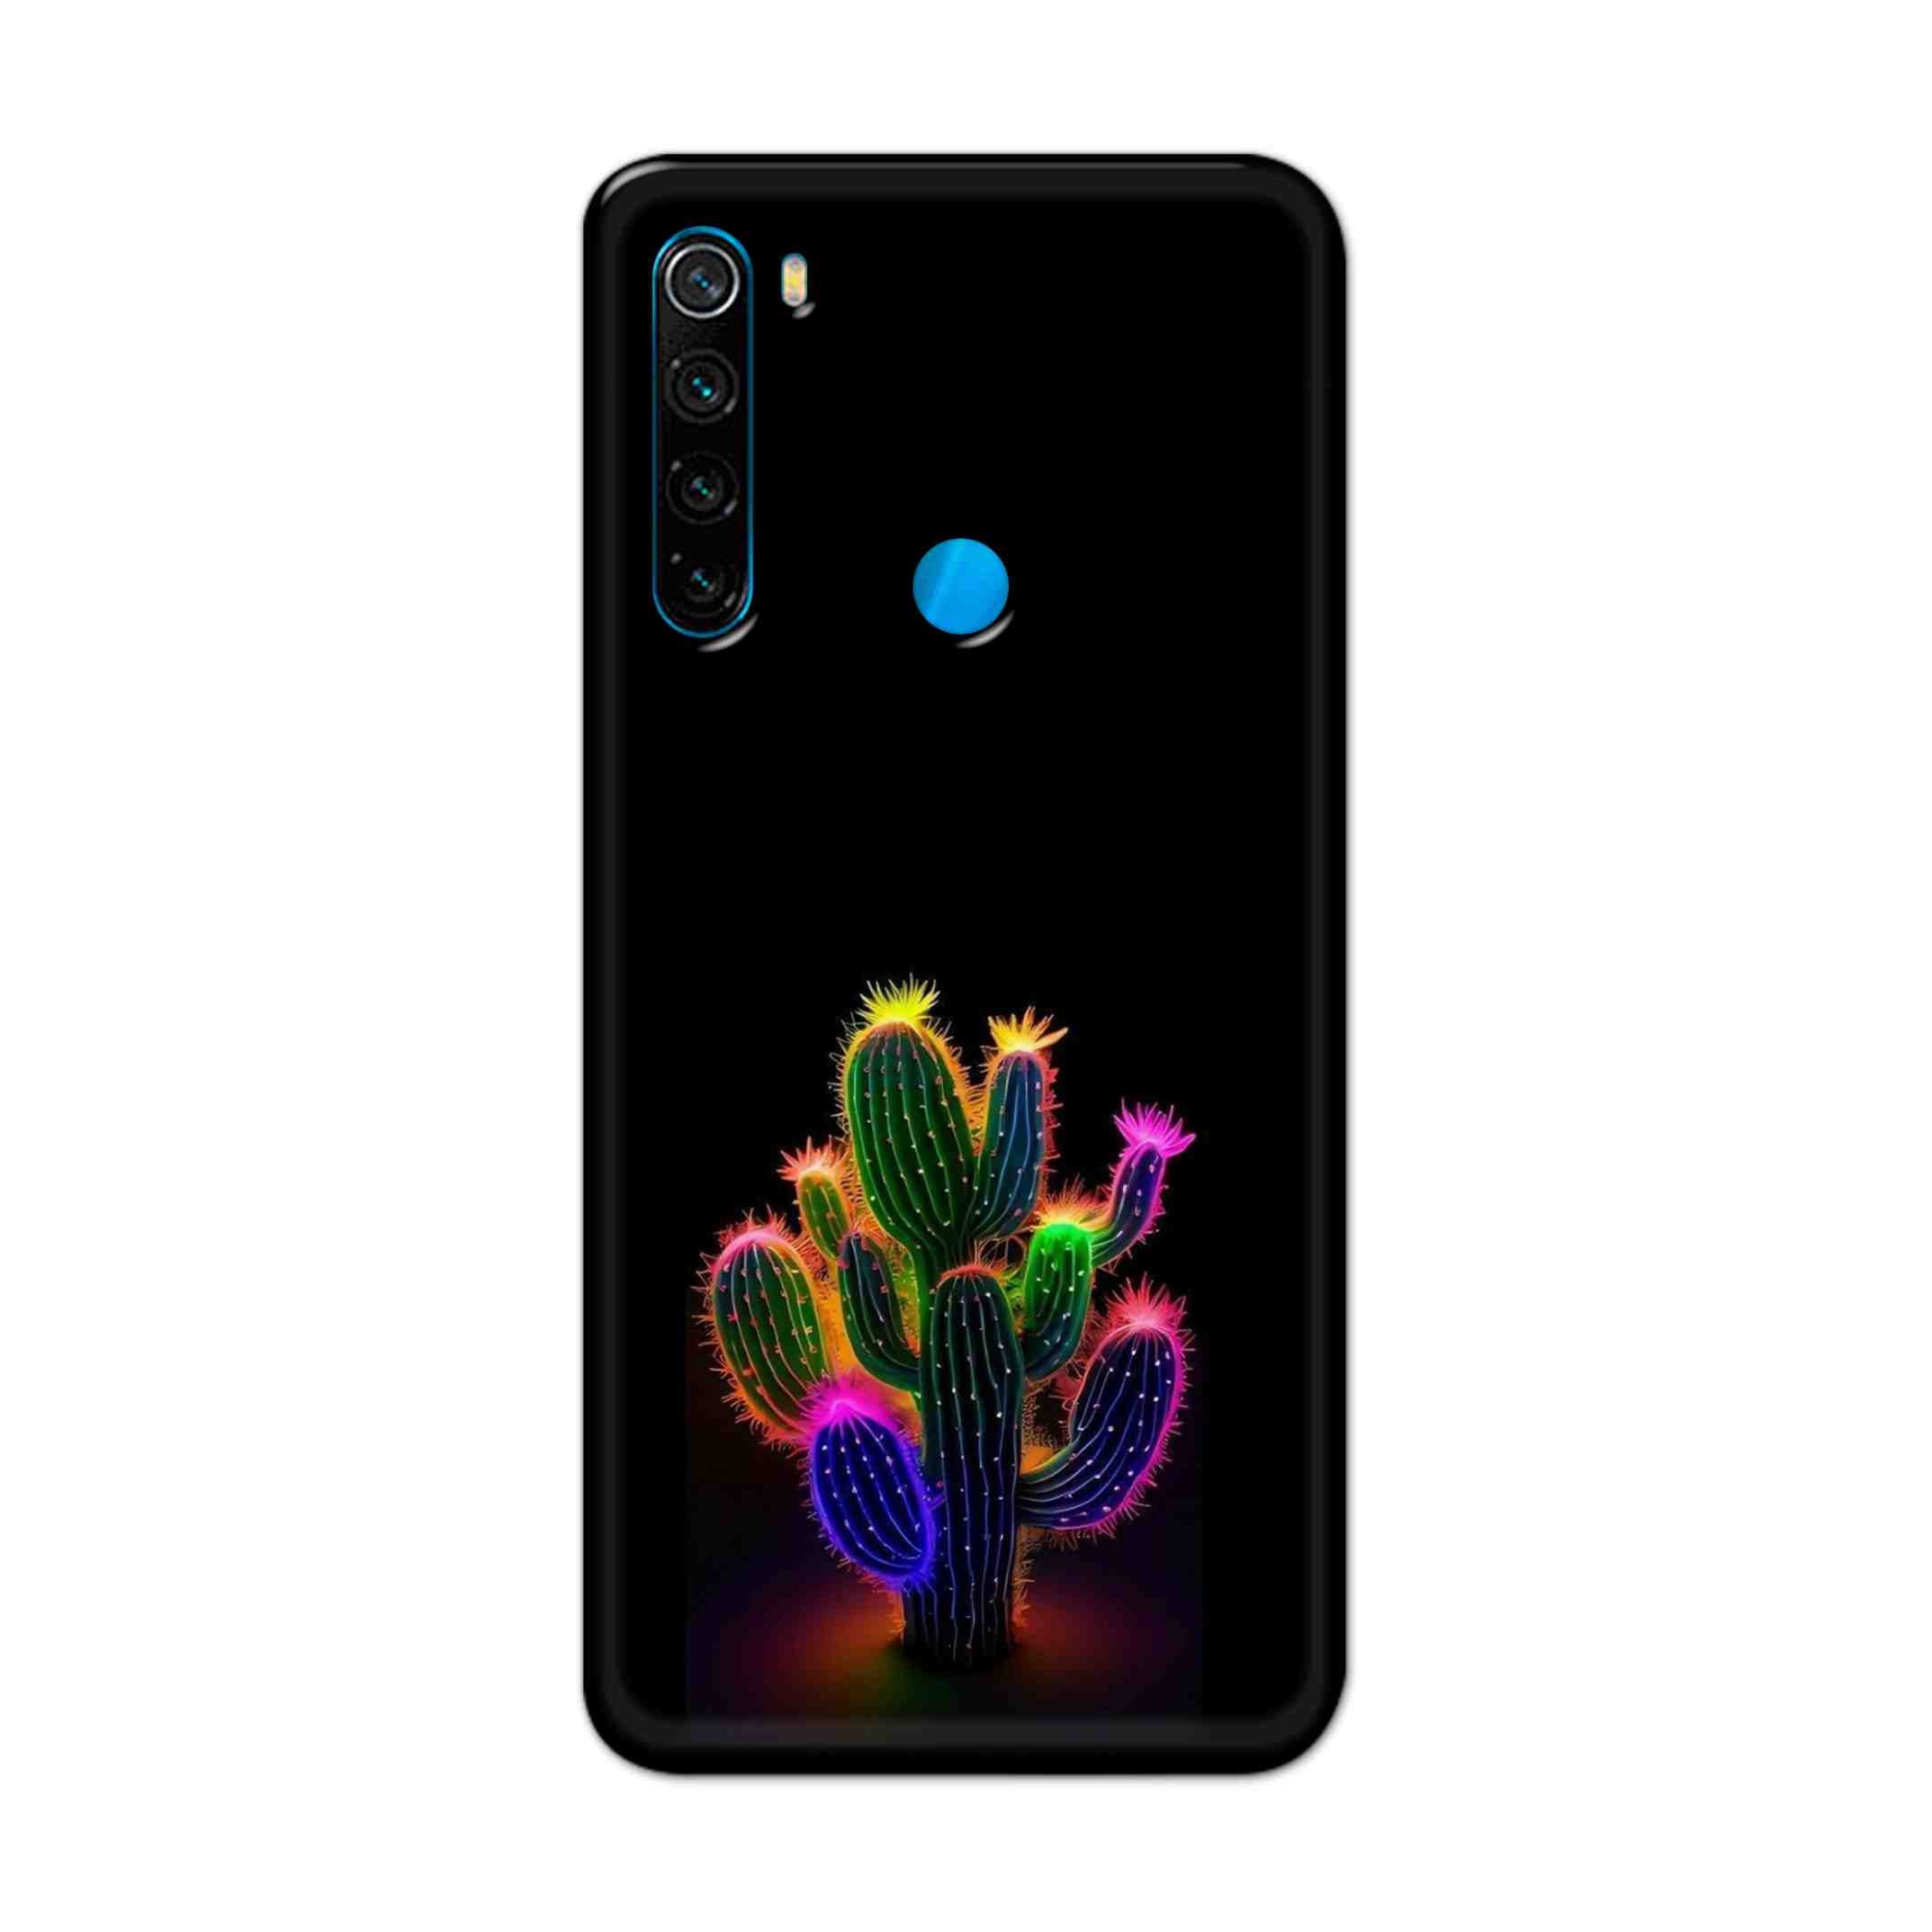 Buy Neon Flower Hard Back Mobile Phone Case Cover For Xiaomi Redmi Note 8 Online